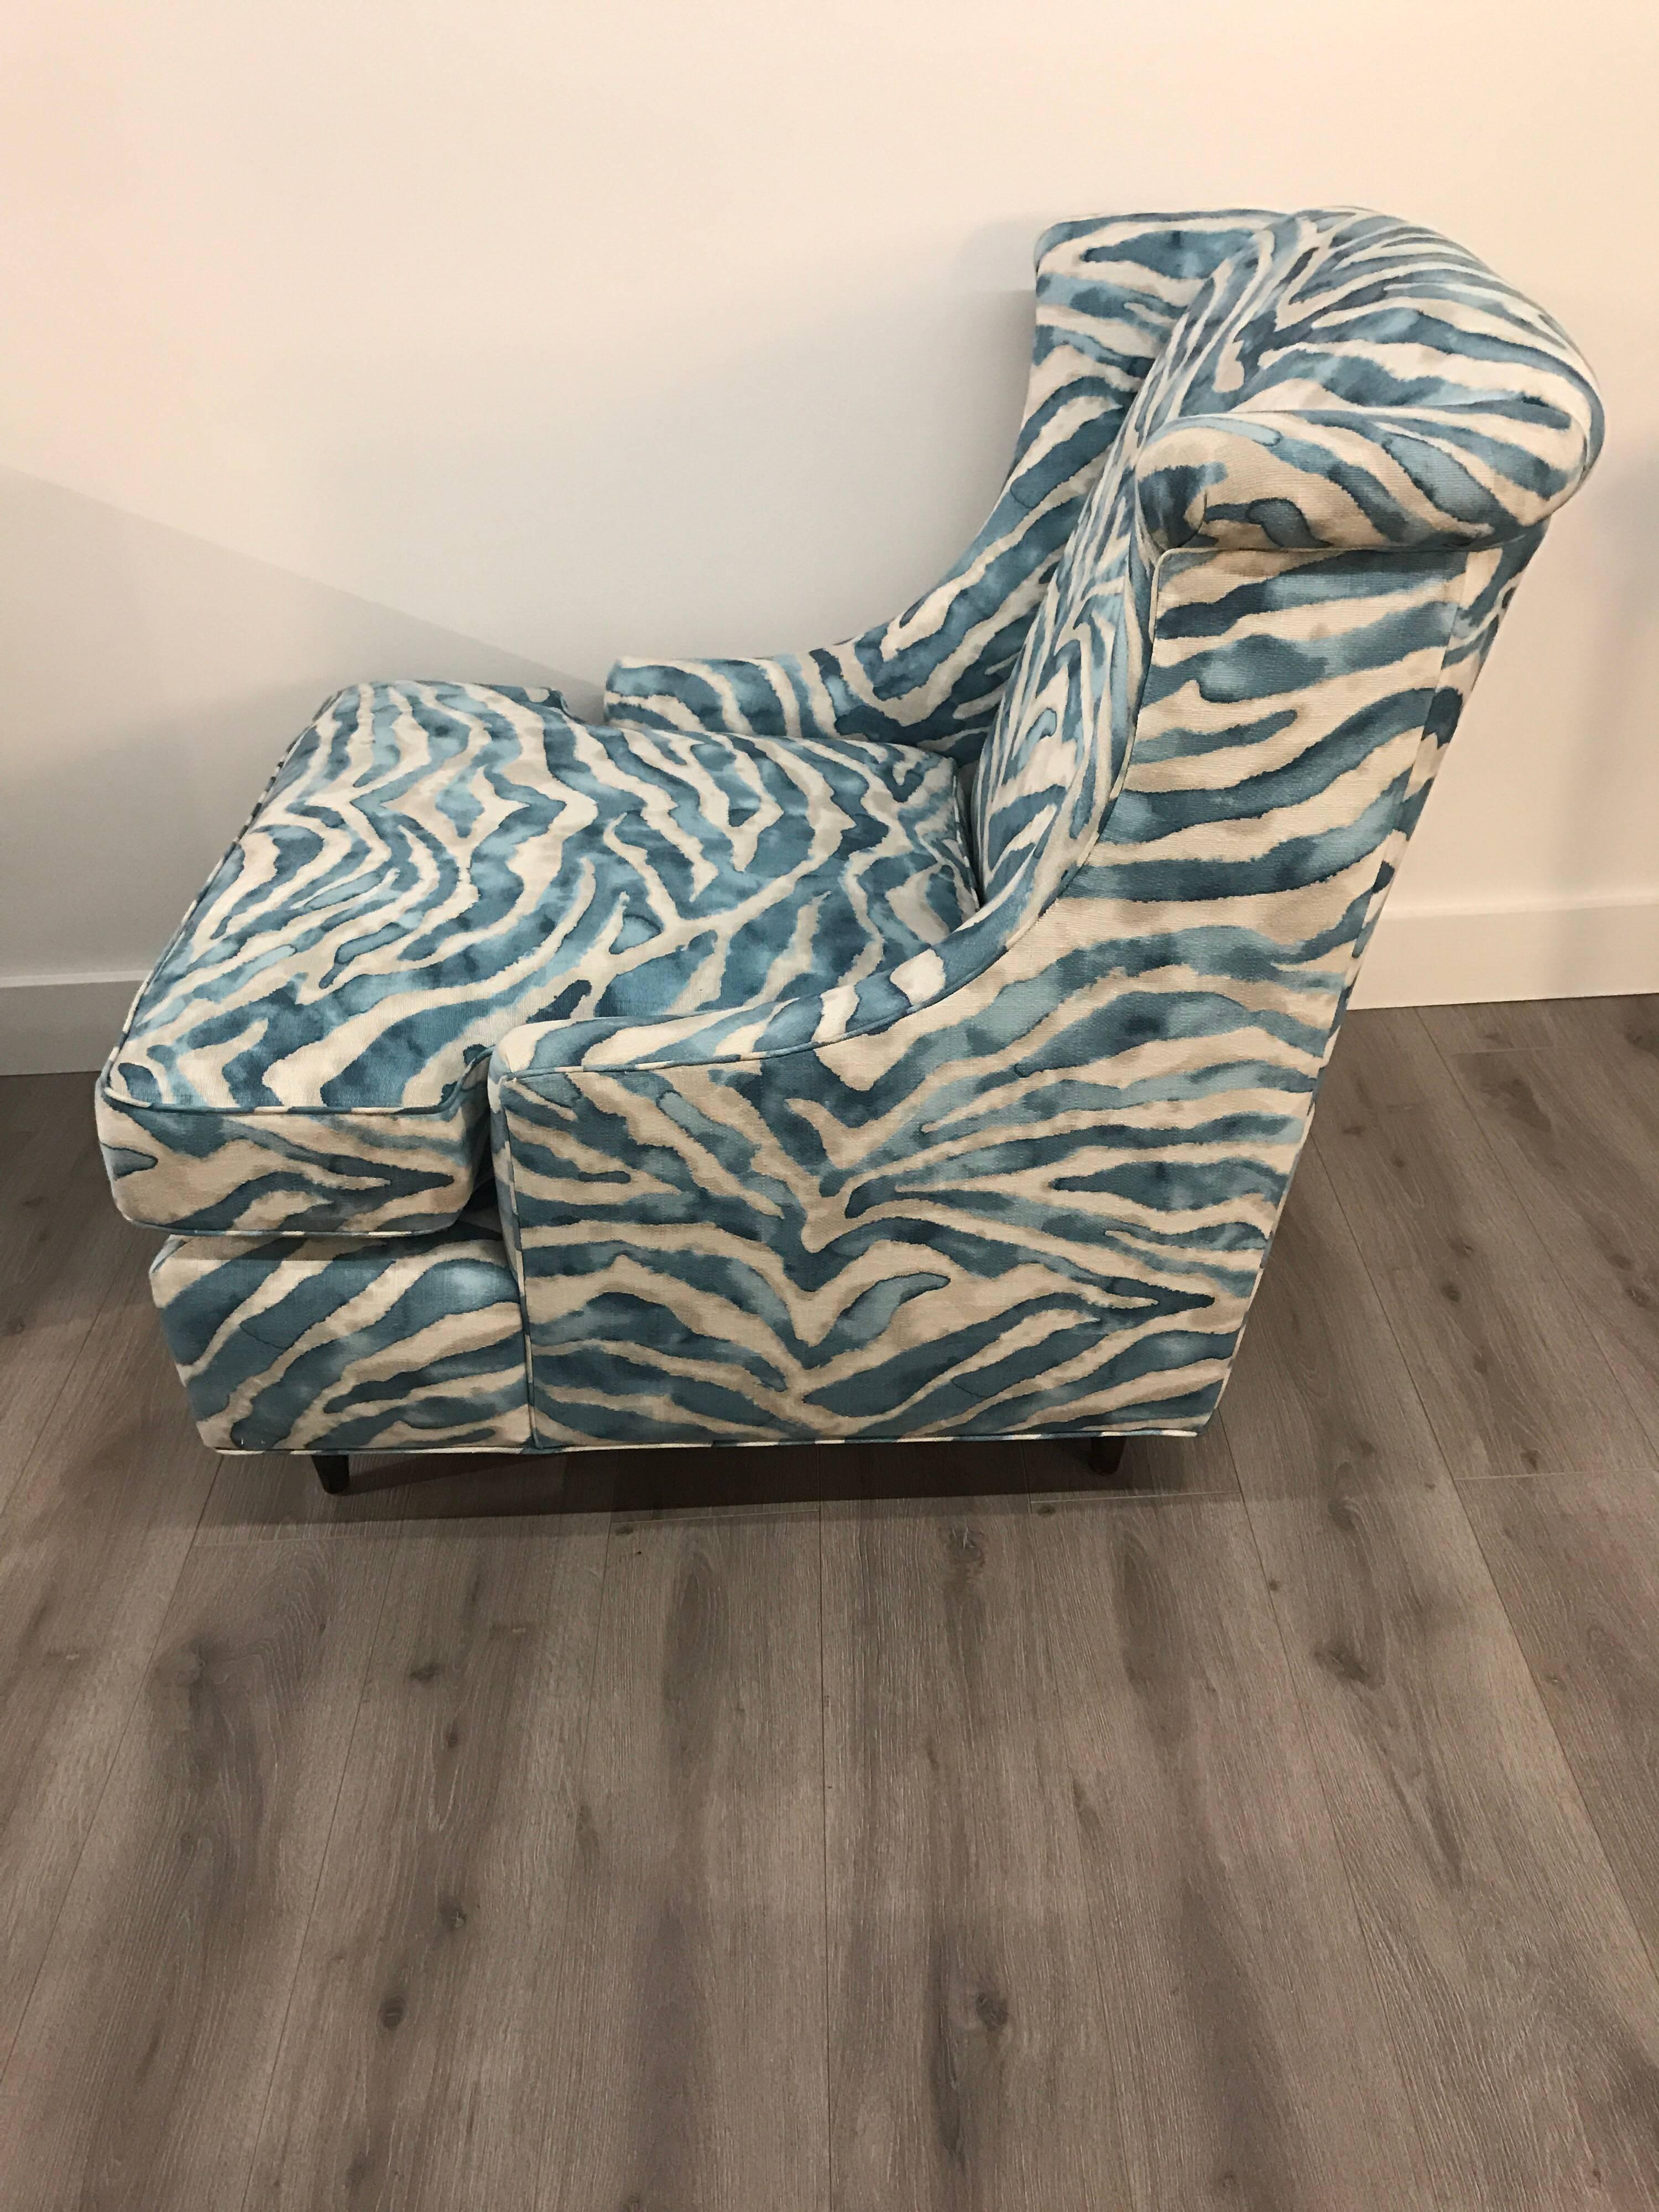 Contemporary Pair of Kravet Upholstered Blue Zebra Print Club Wingback Chairs